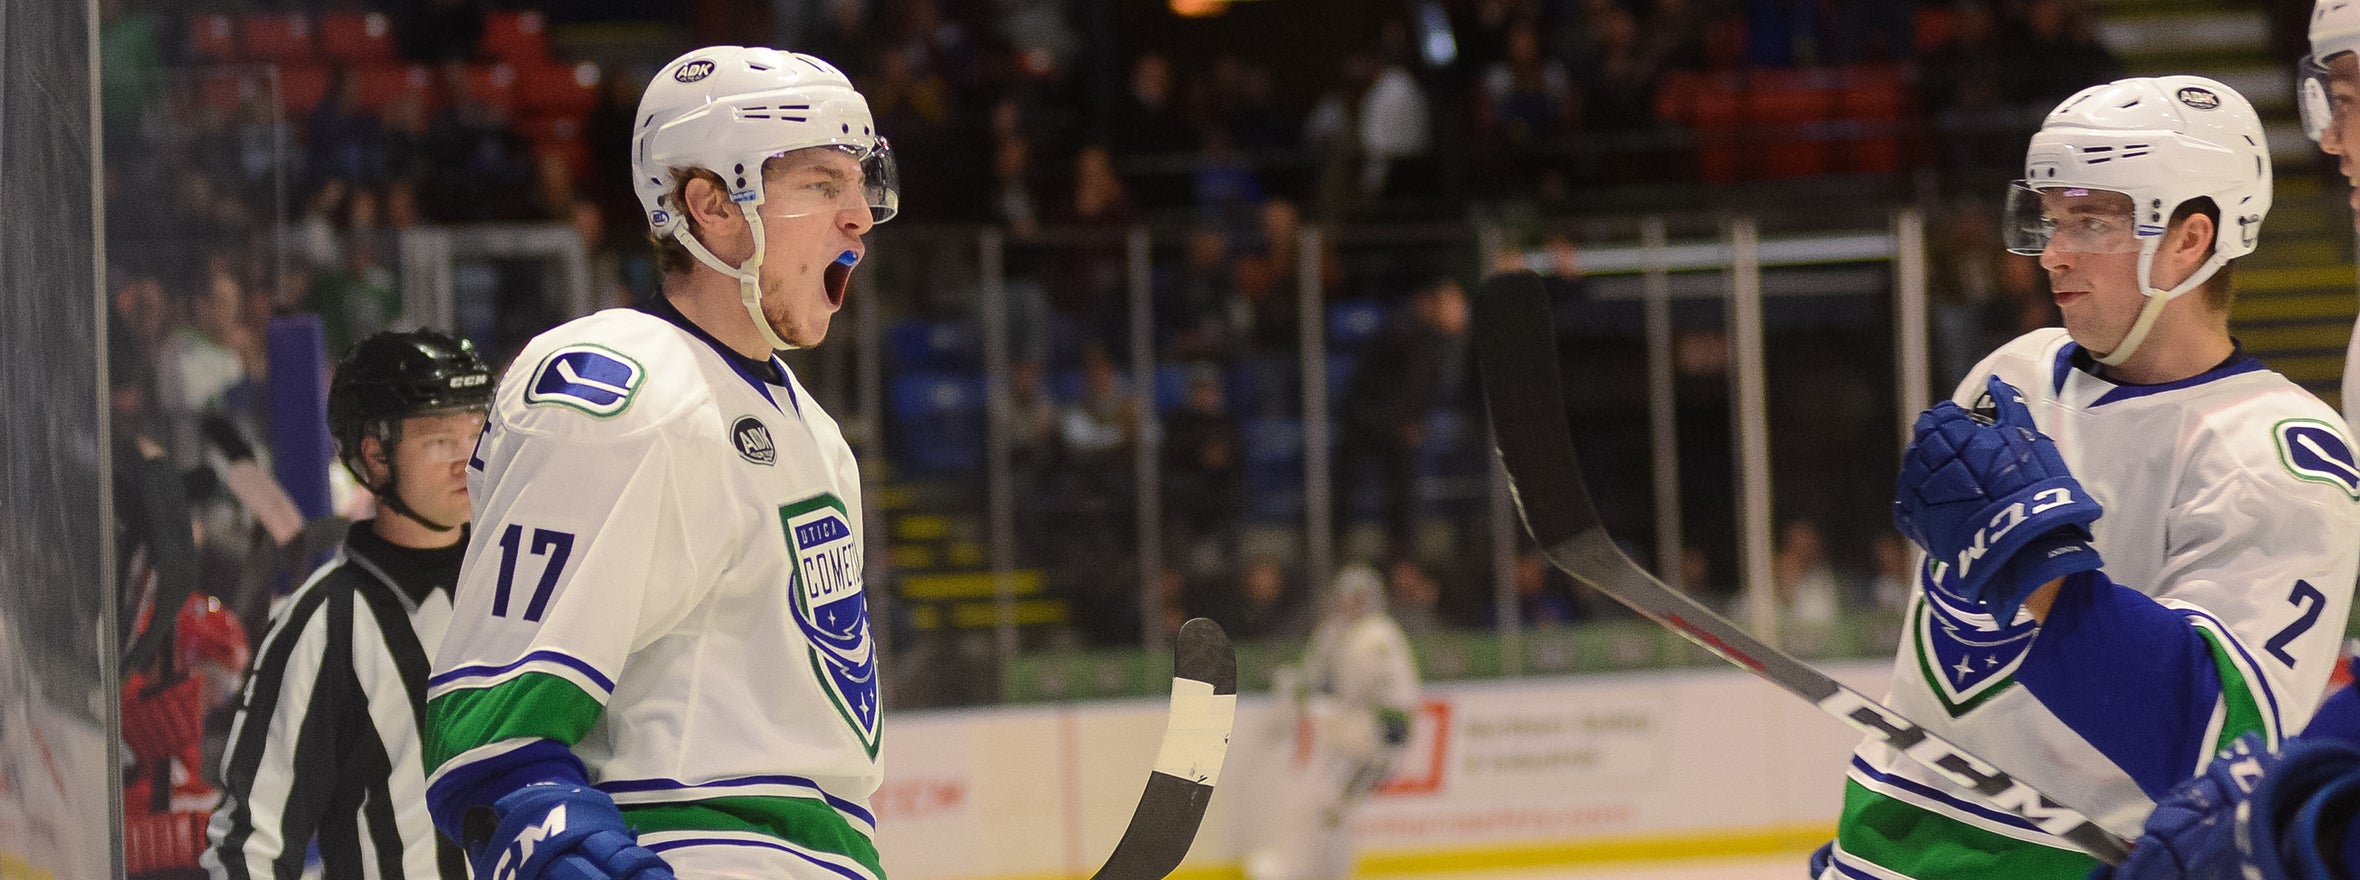 CANUCKS RECALL ADAM GAUDETTE FROM THE COMETS